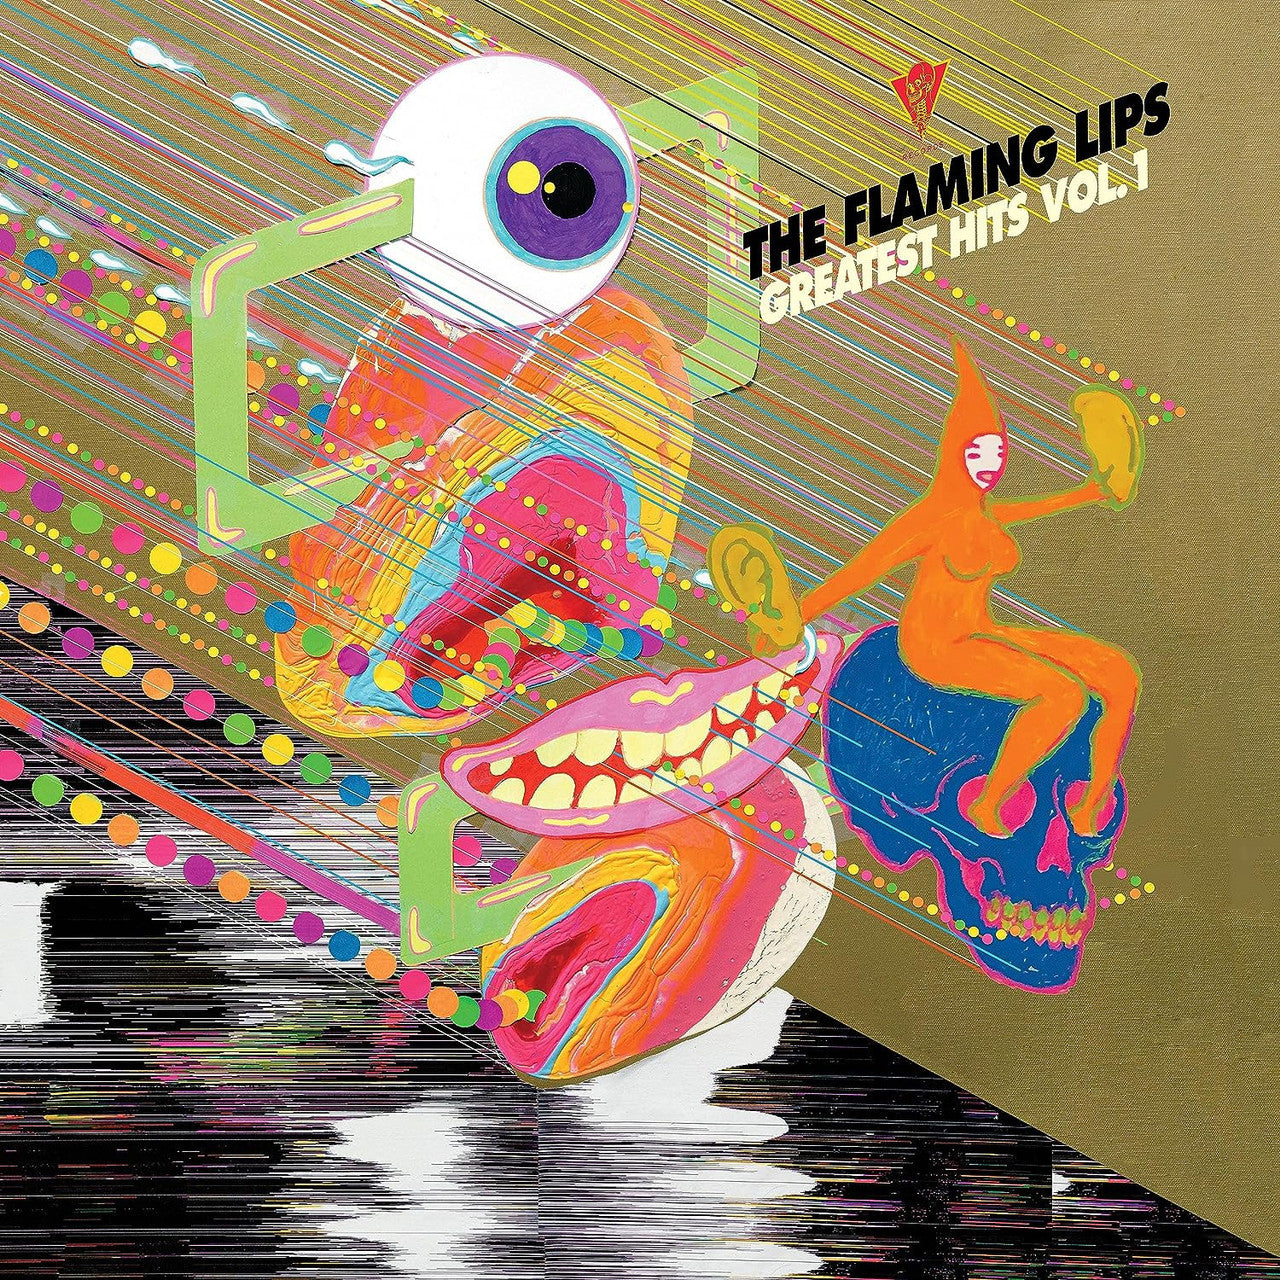 Order The Flaming Lips - The Flaming Lips Greatest Hits Vol. 1 (Gold Vinyl)